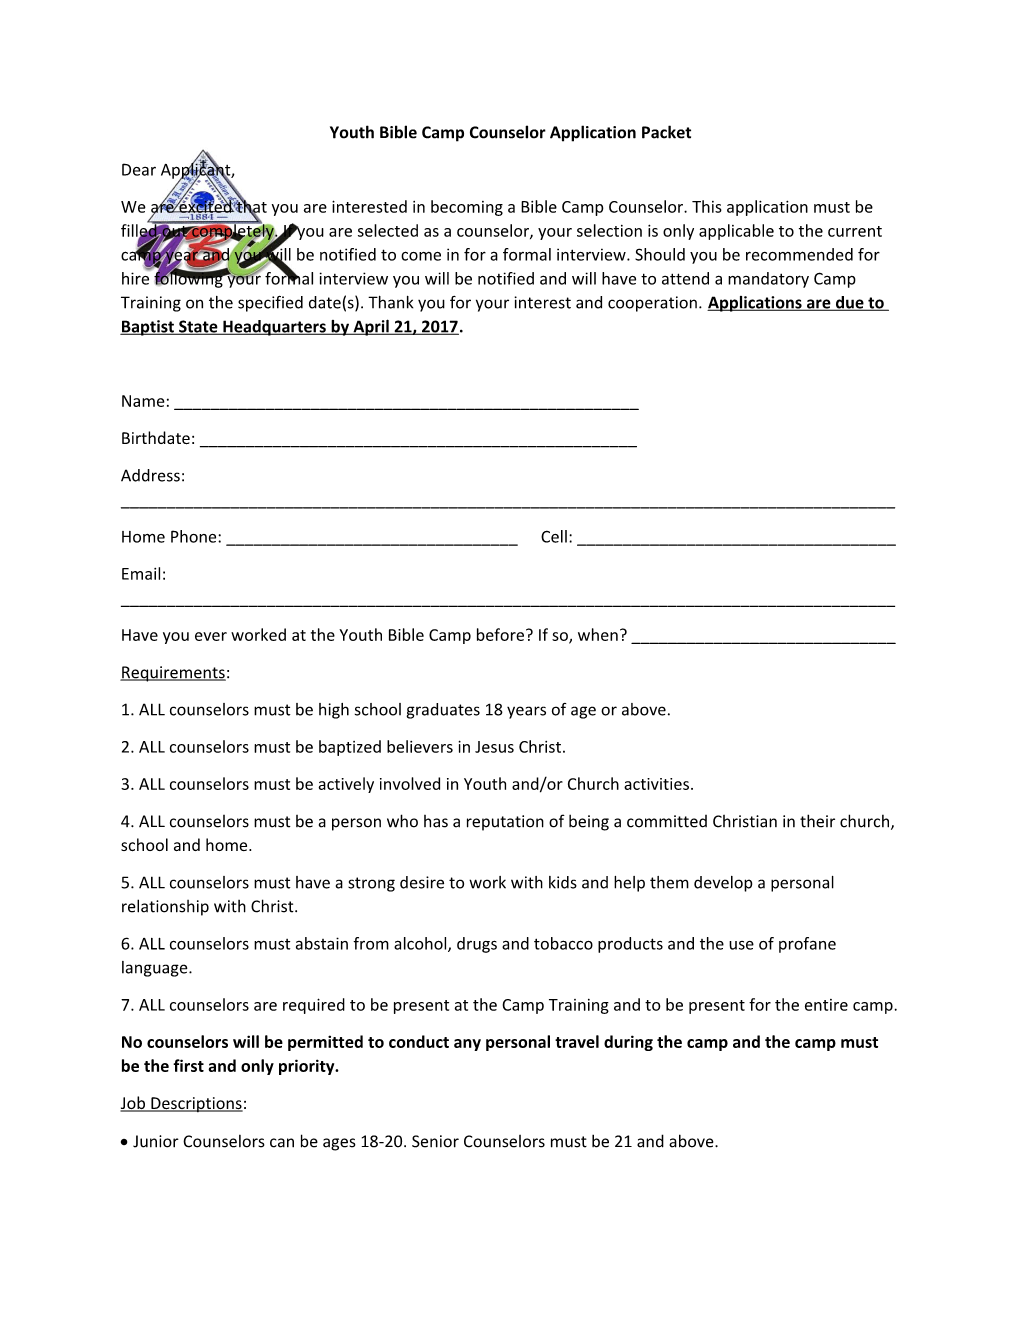 Youth Bible Camp Counselor Application Packet